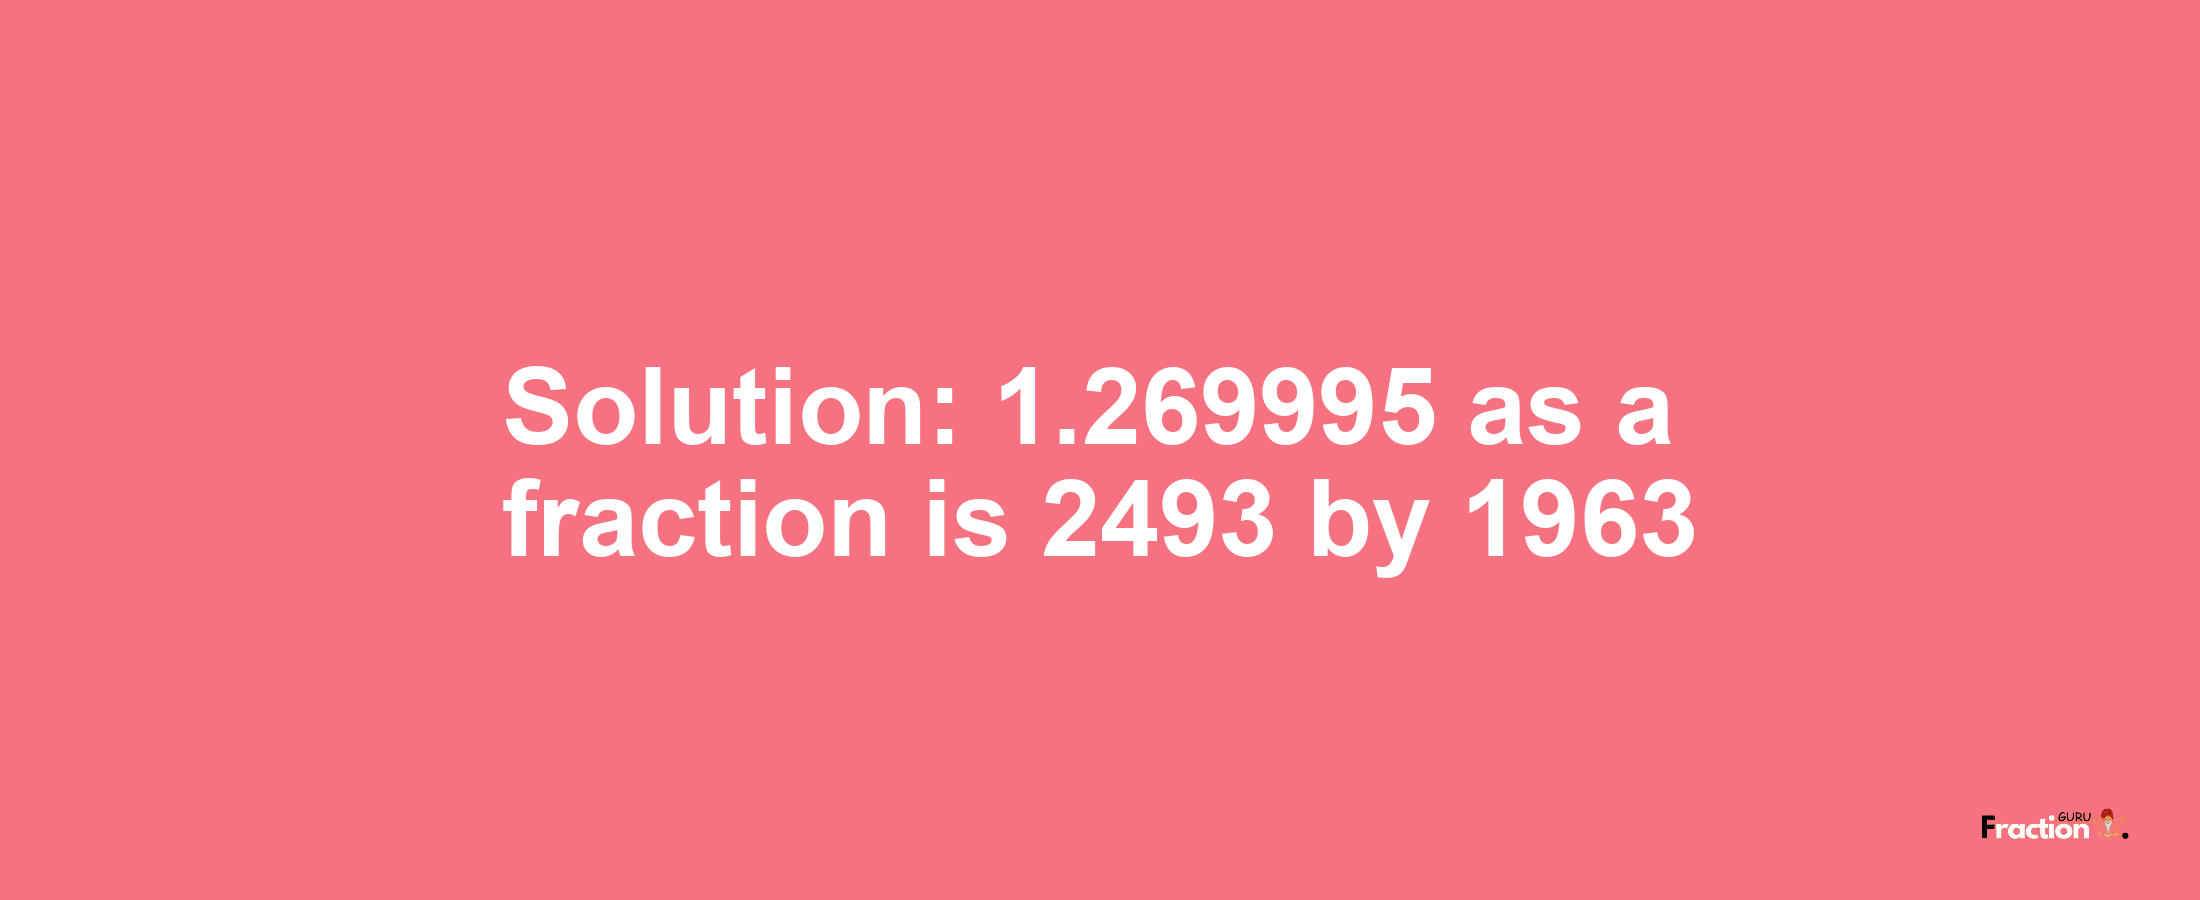 Solution:1.269995 as a fraction is 2493/1963